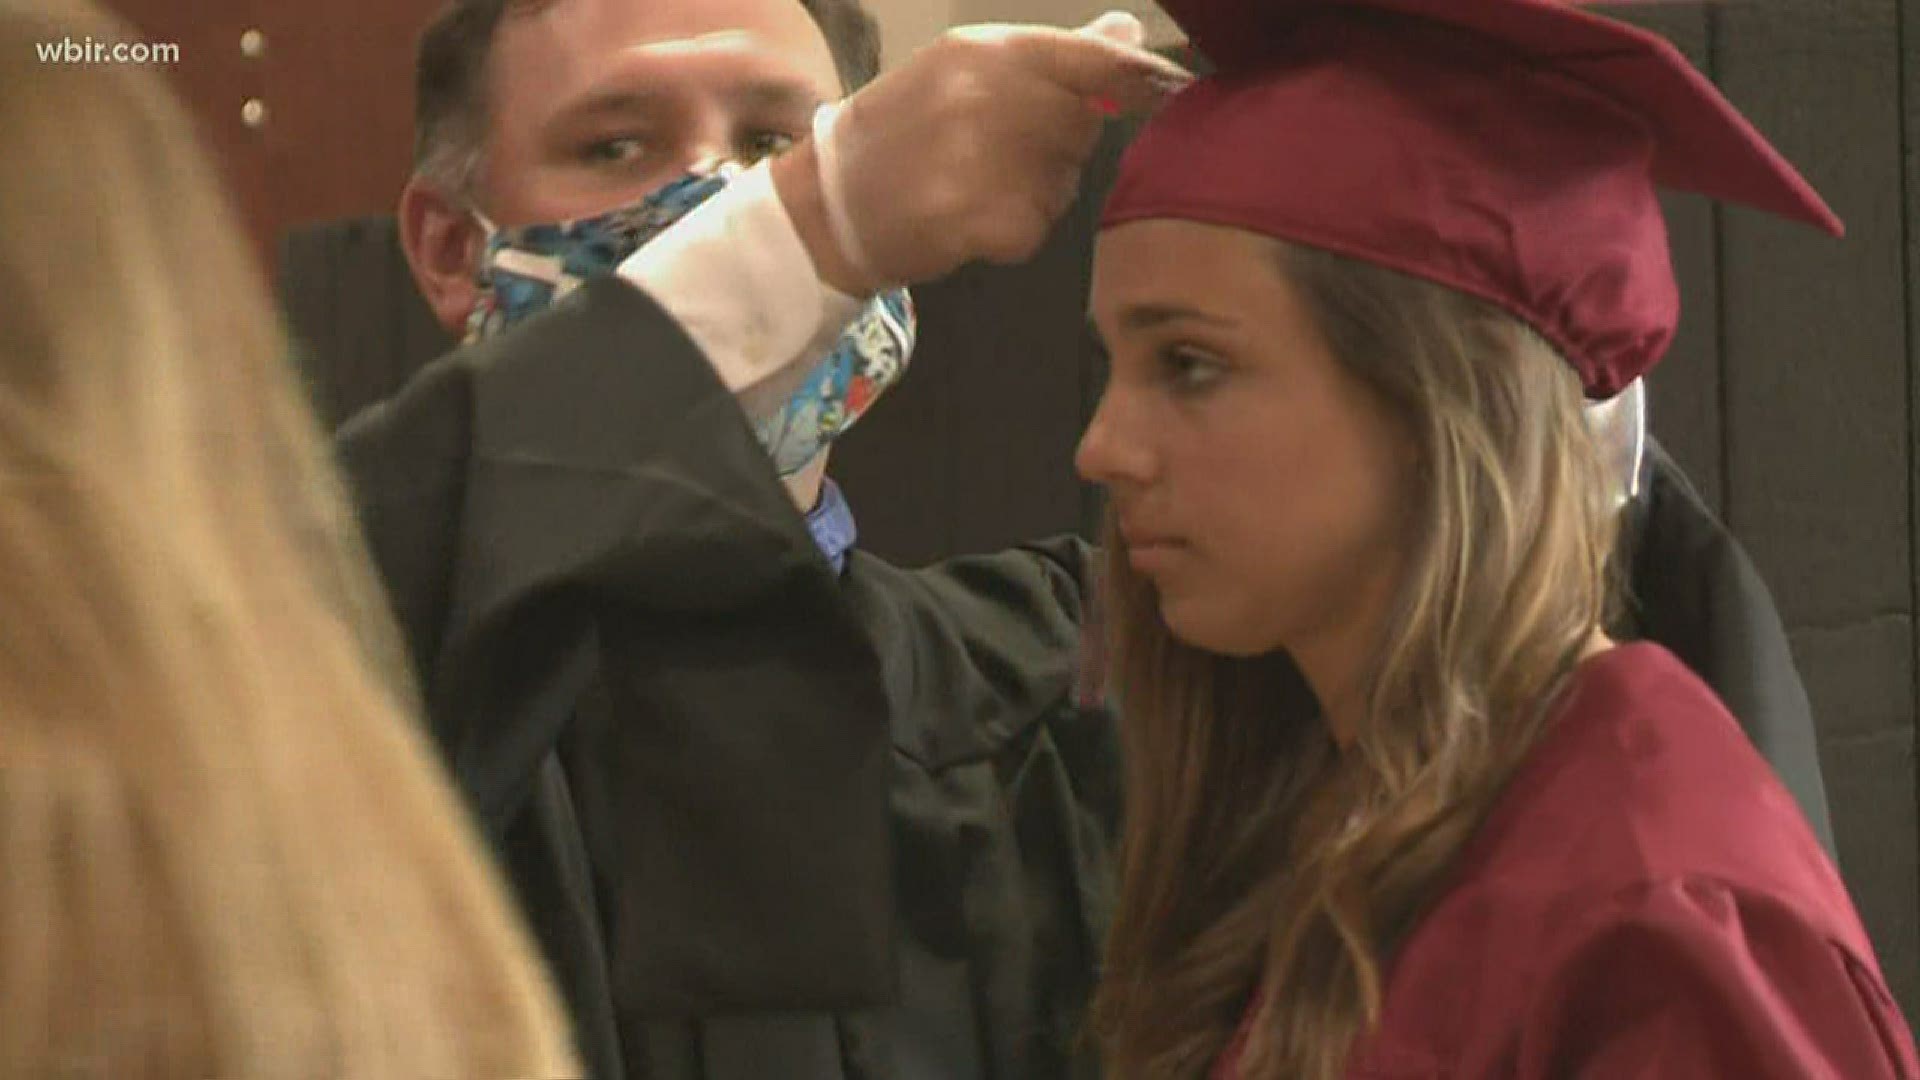 Instead of on a crowded football field, the school moved the graduation ceremony inside and limited it to one student and one family at at time.